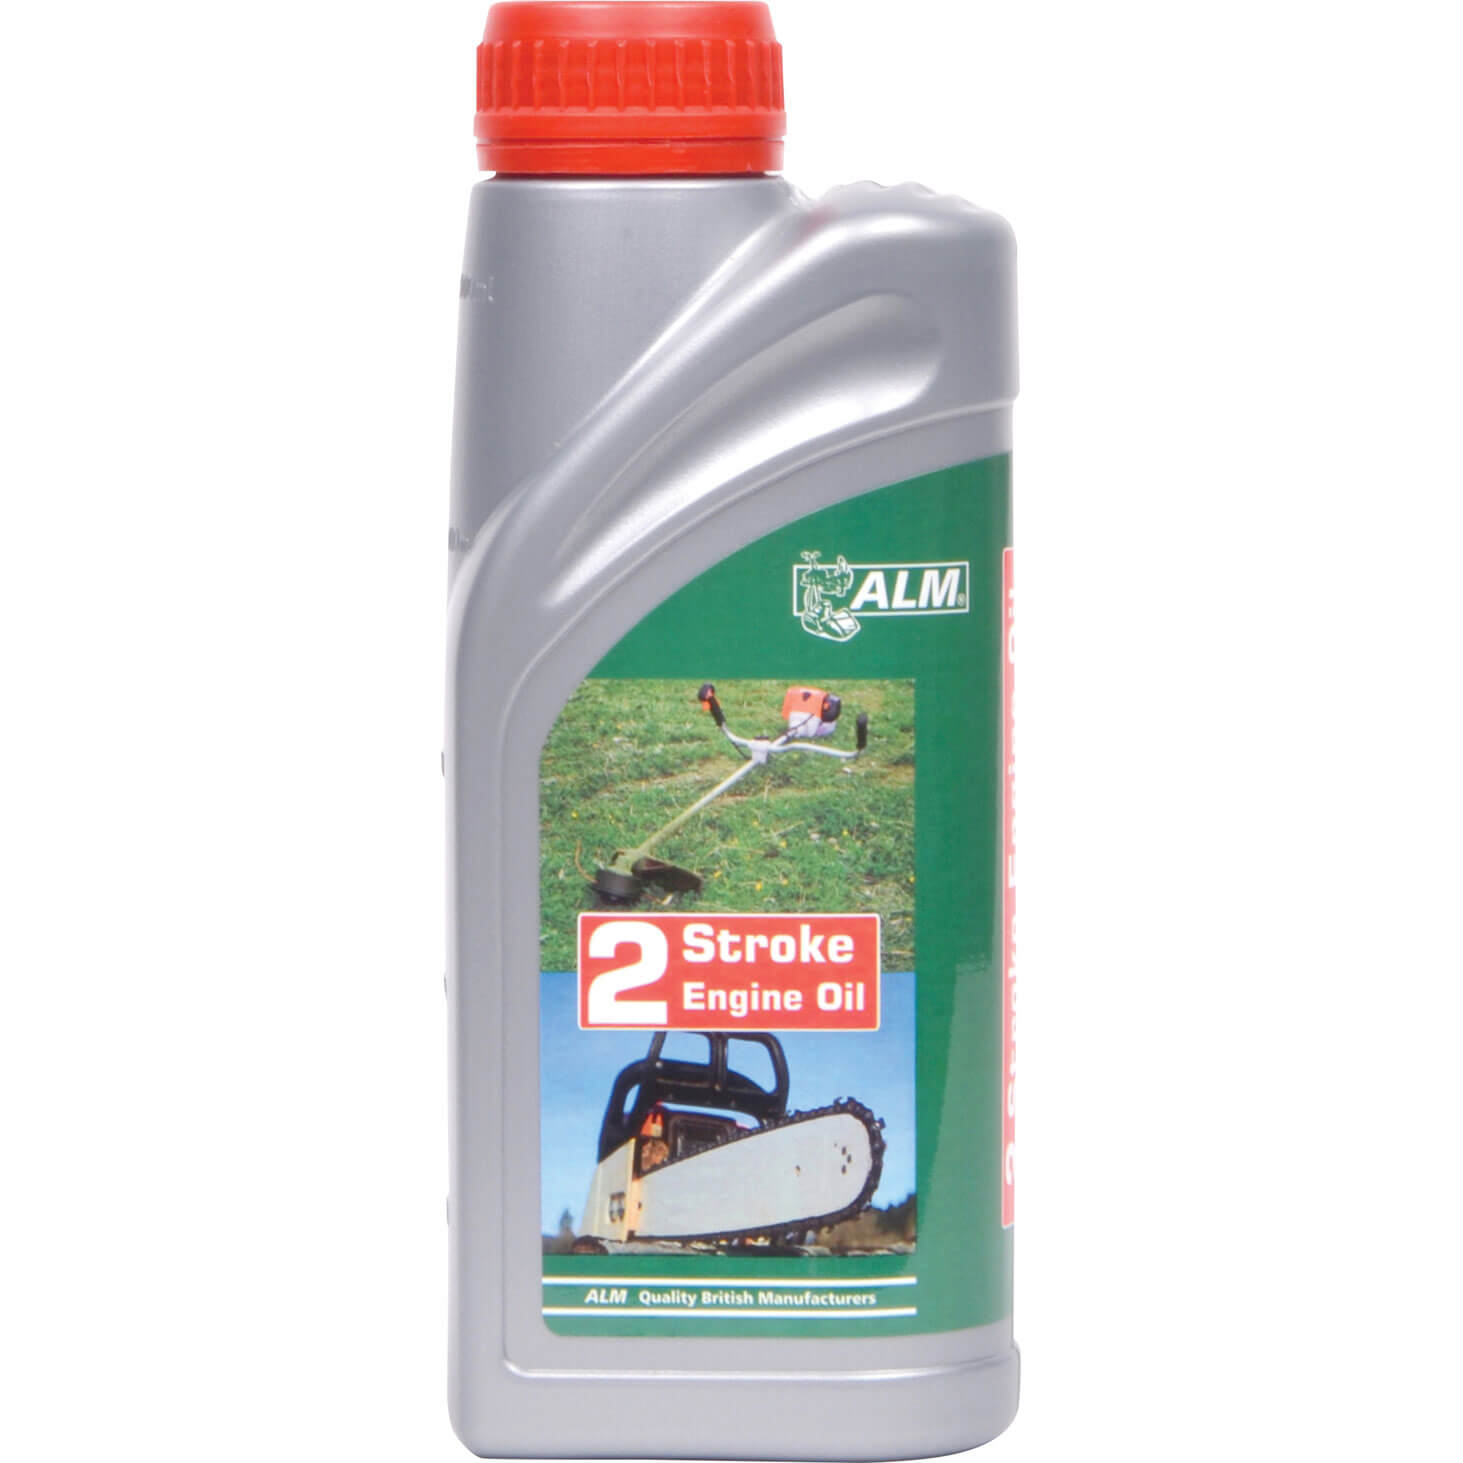 2 Stroke Oil 500ml For Garden Tools And Lawn Mowers